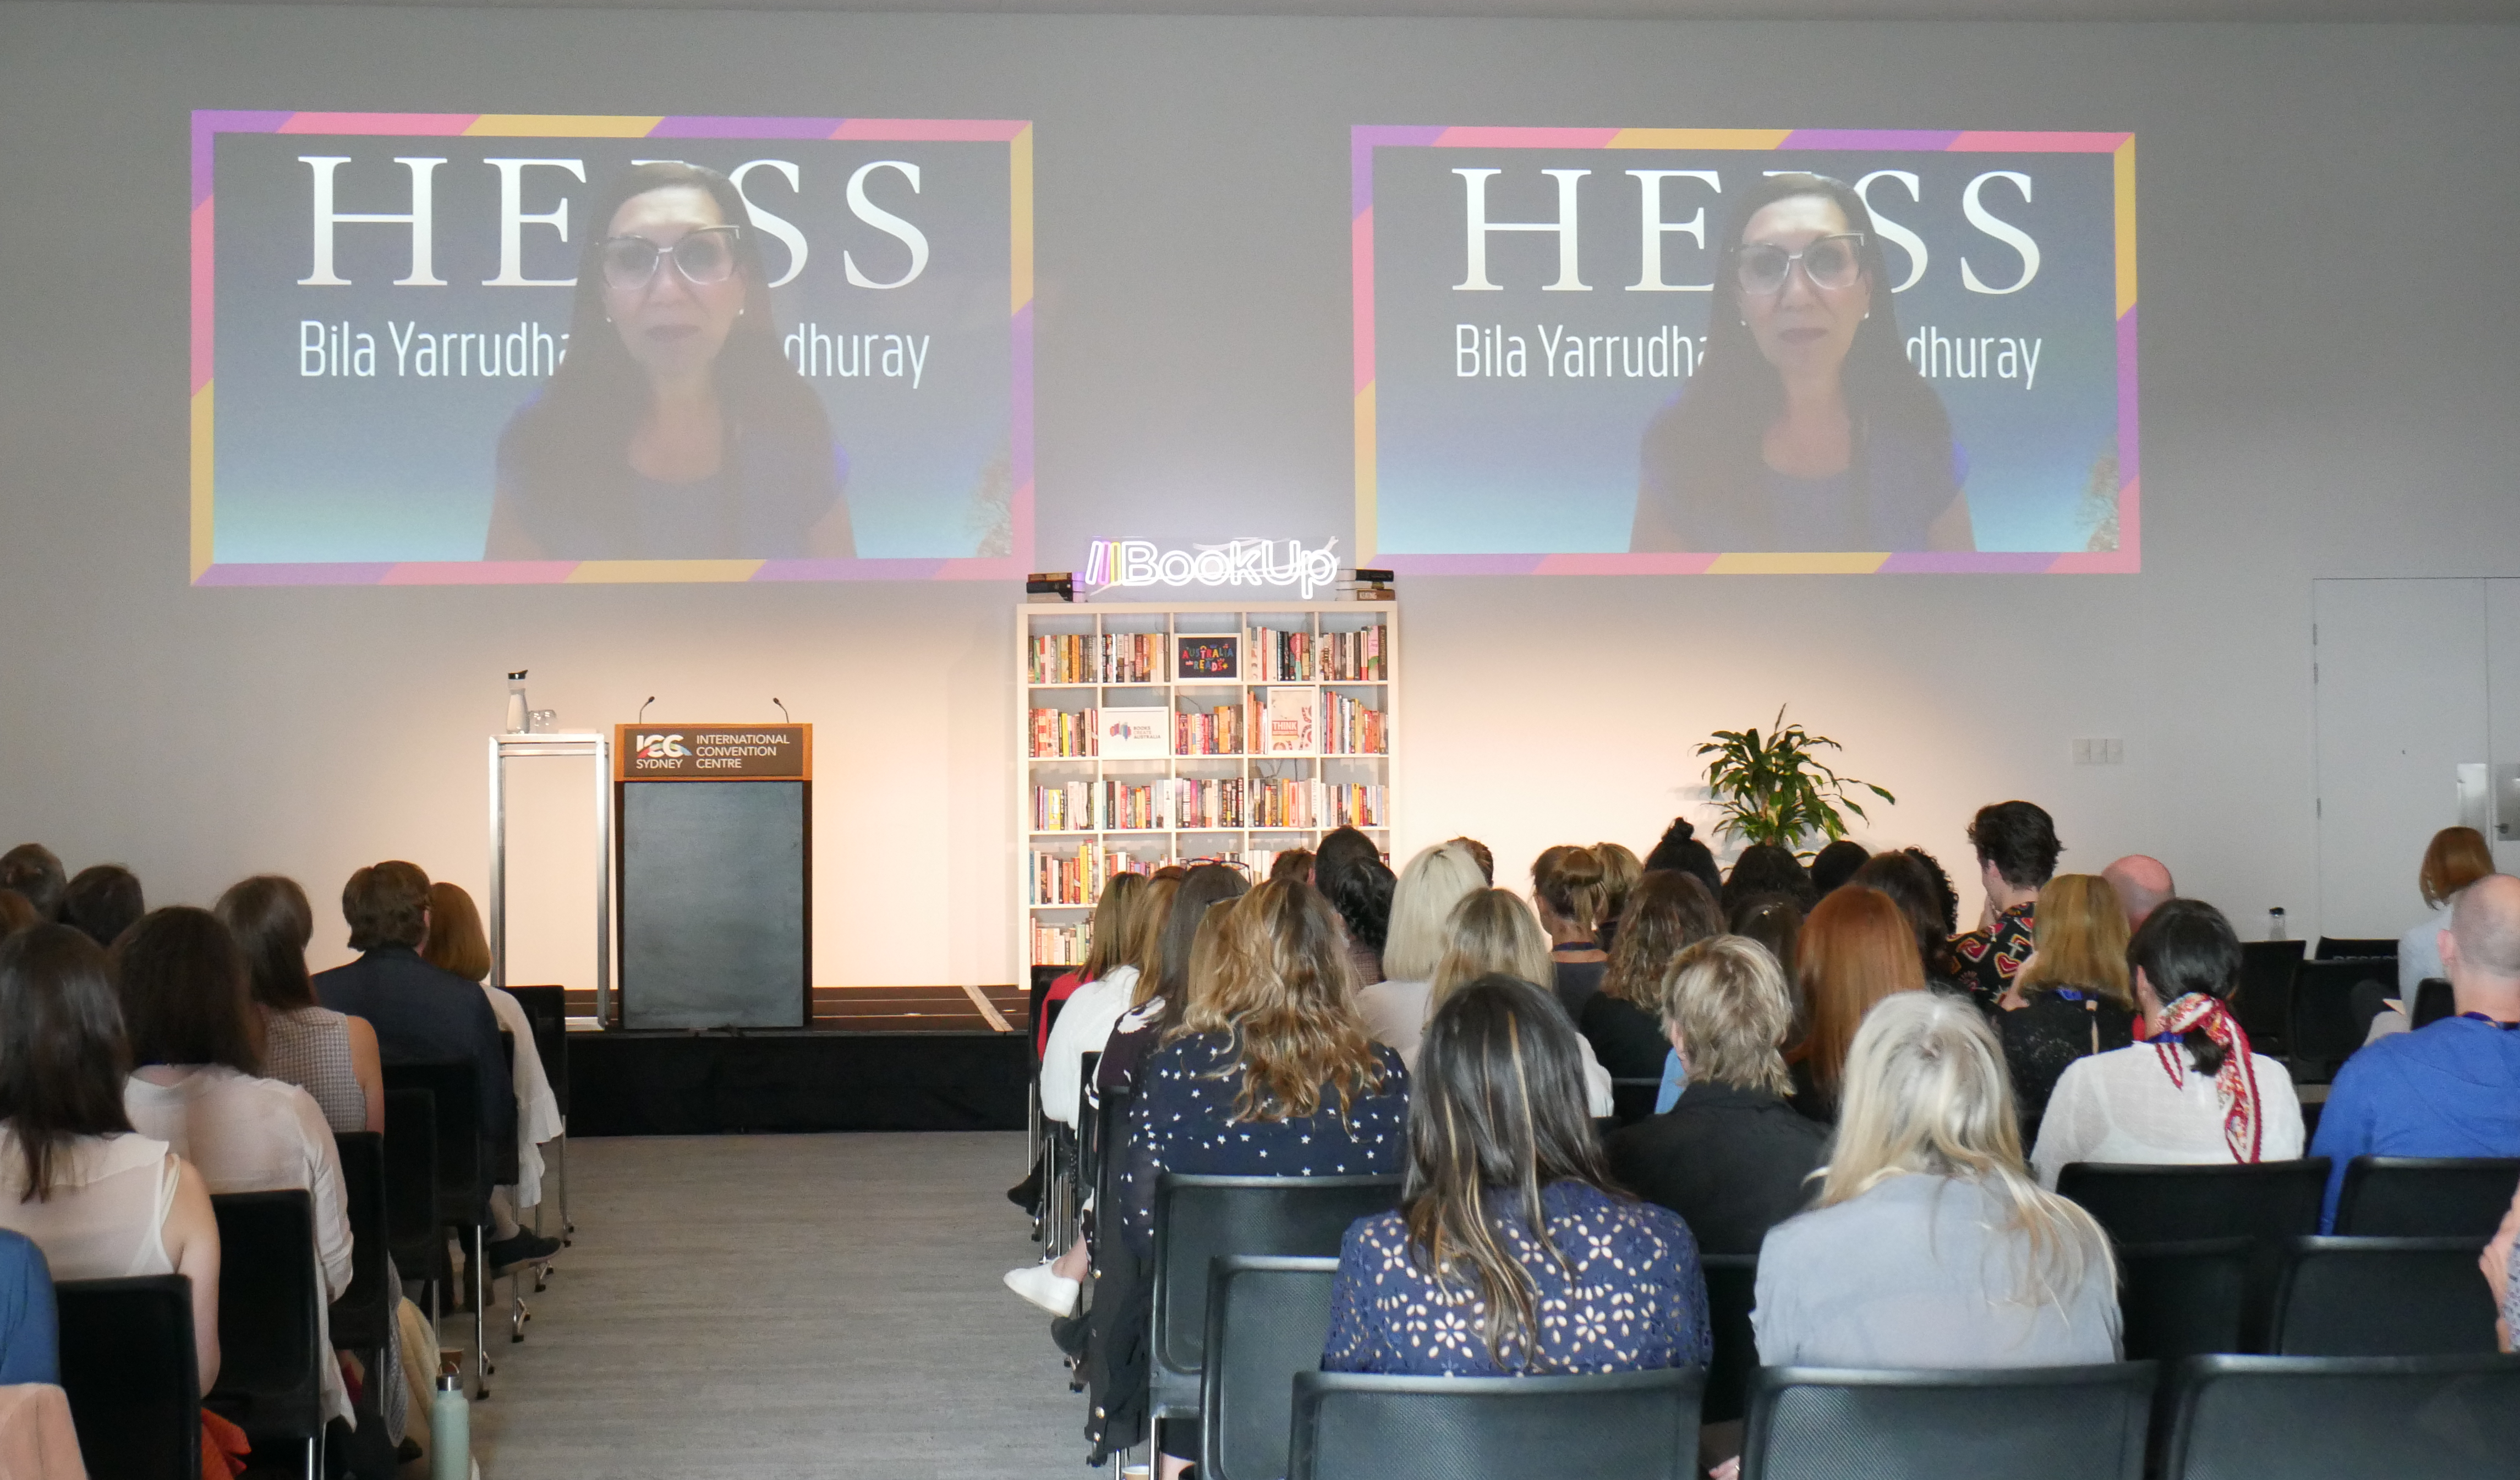 A photograph of Anita Heiss delivering the opening address for the 2021 BookUp conference via video link. She is projected onto two screens above a stage with an empty podium. In the front of the frame, the physical BookUp audience sits in rows of chairs.